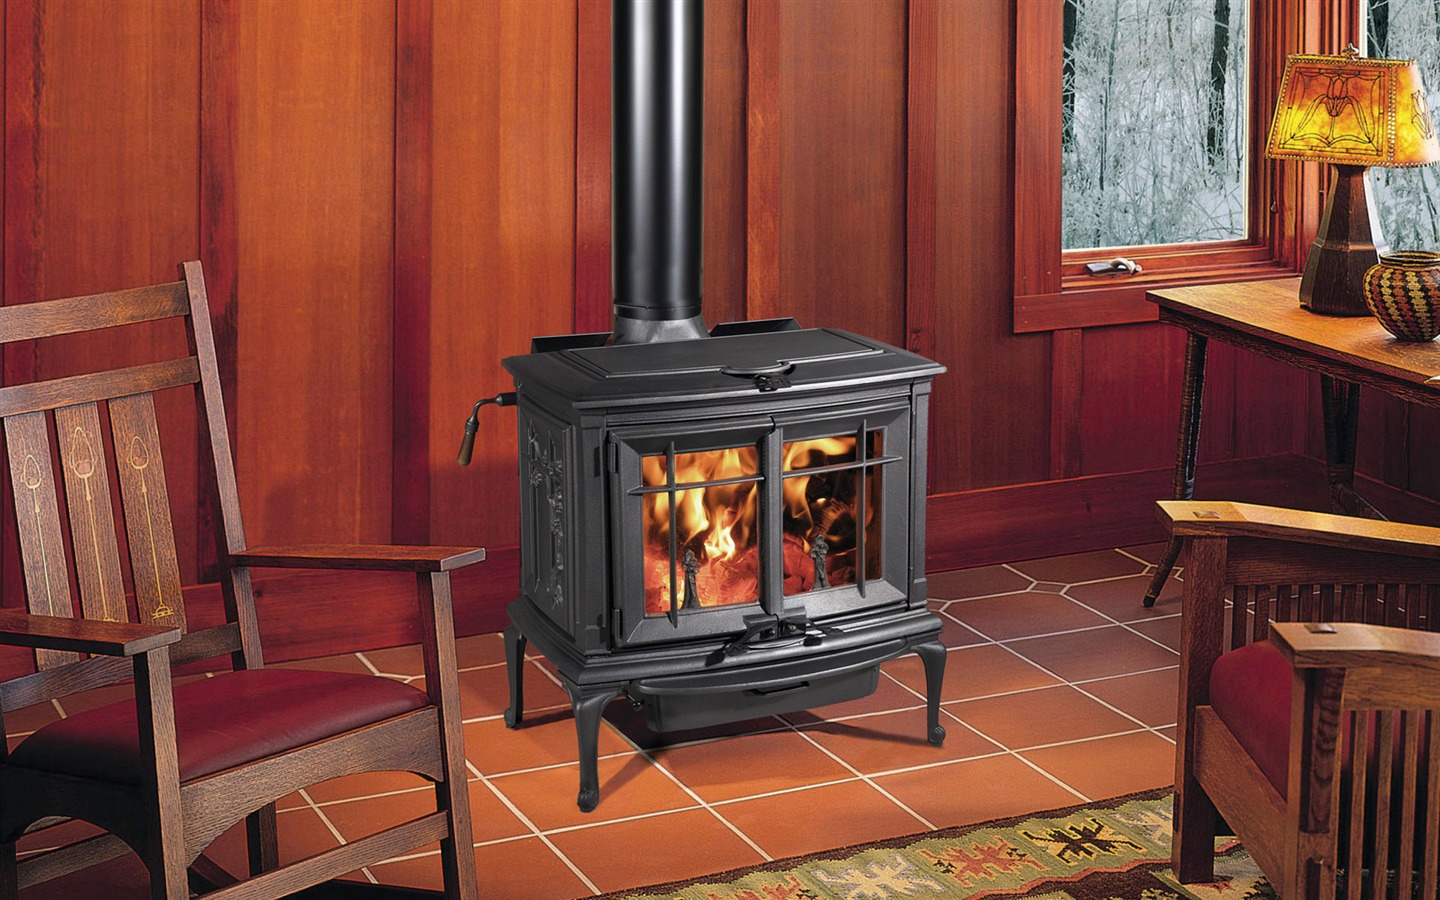 Western-style family fireplace wallpaper (1) #4 - 1440x900